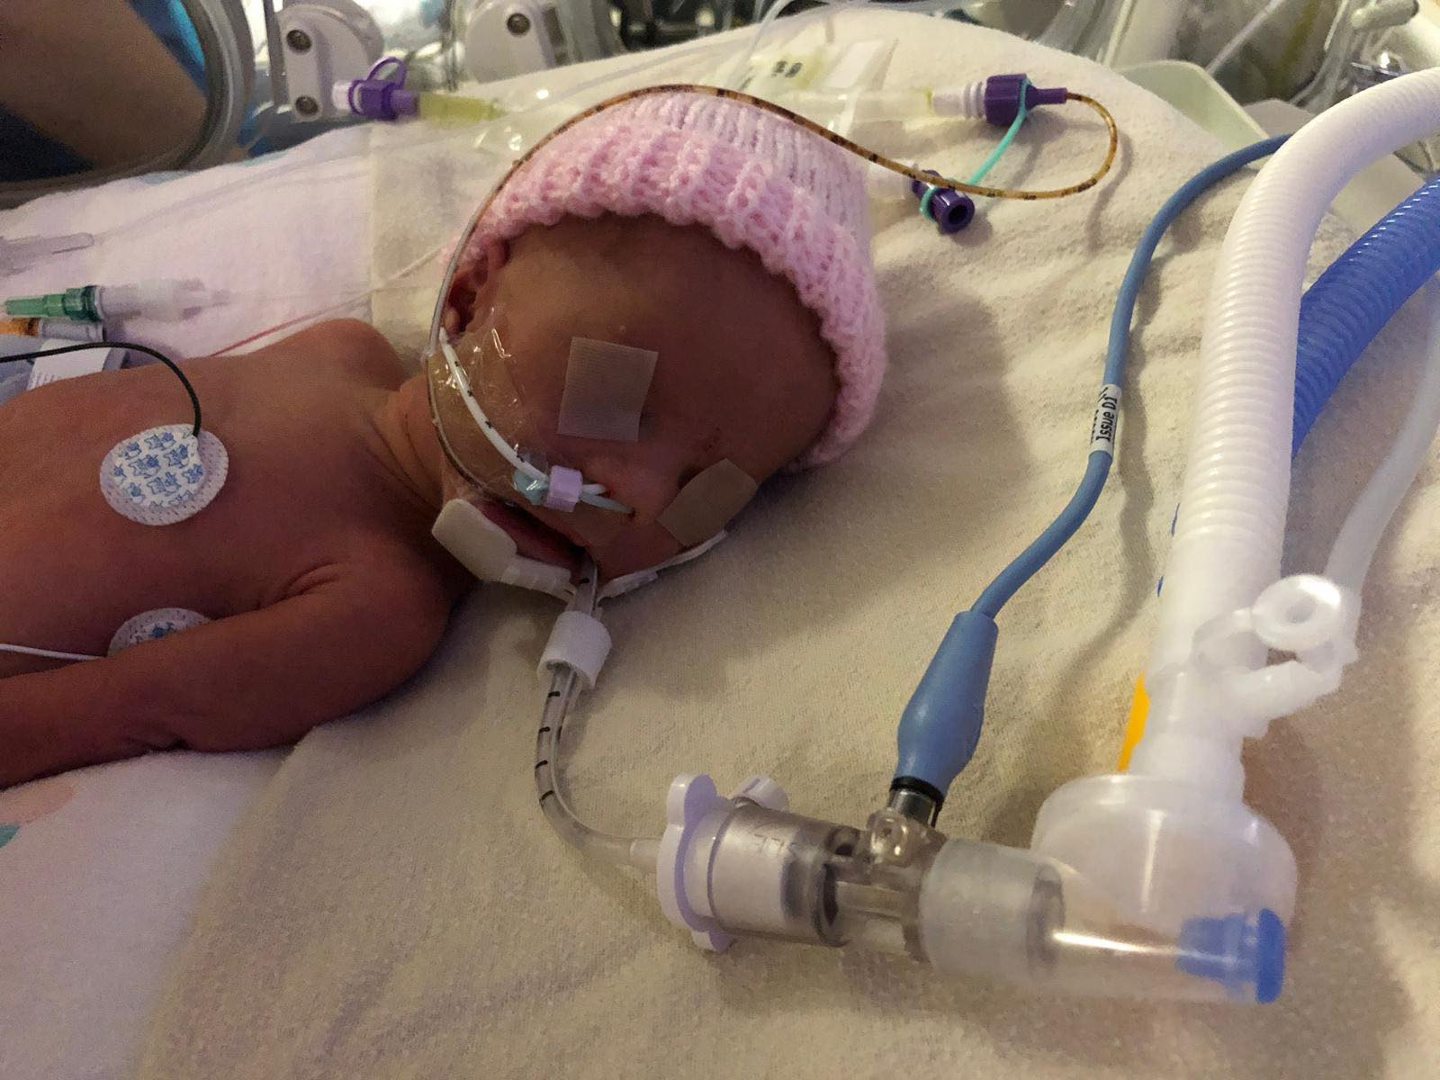 Georgia spent 32 days in the neonatal unit. Image: The Archie Foundation